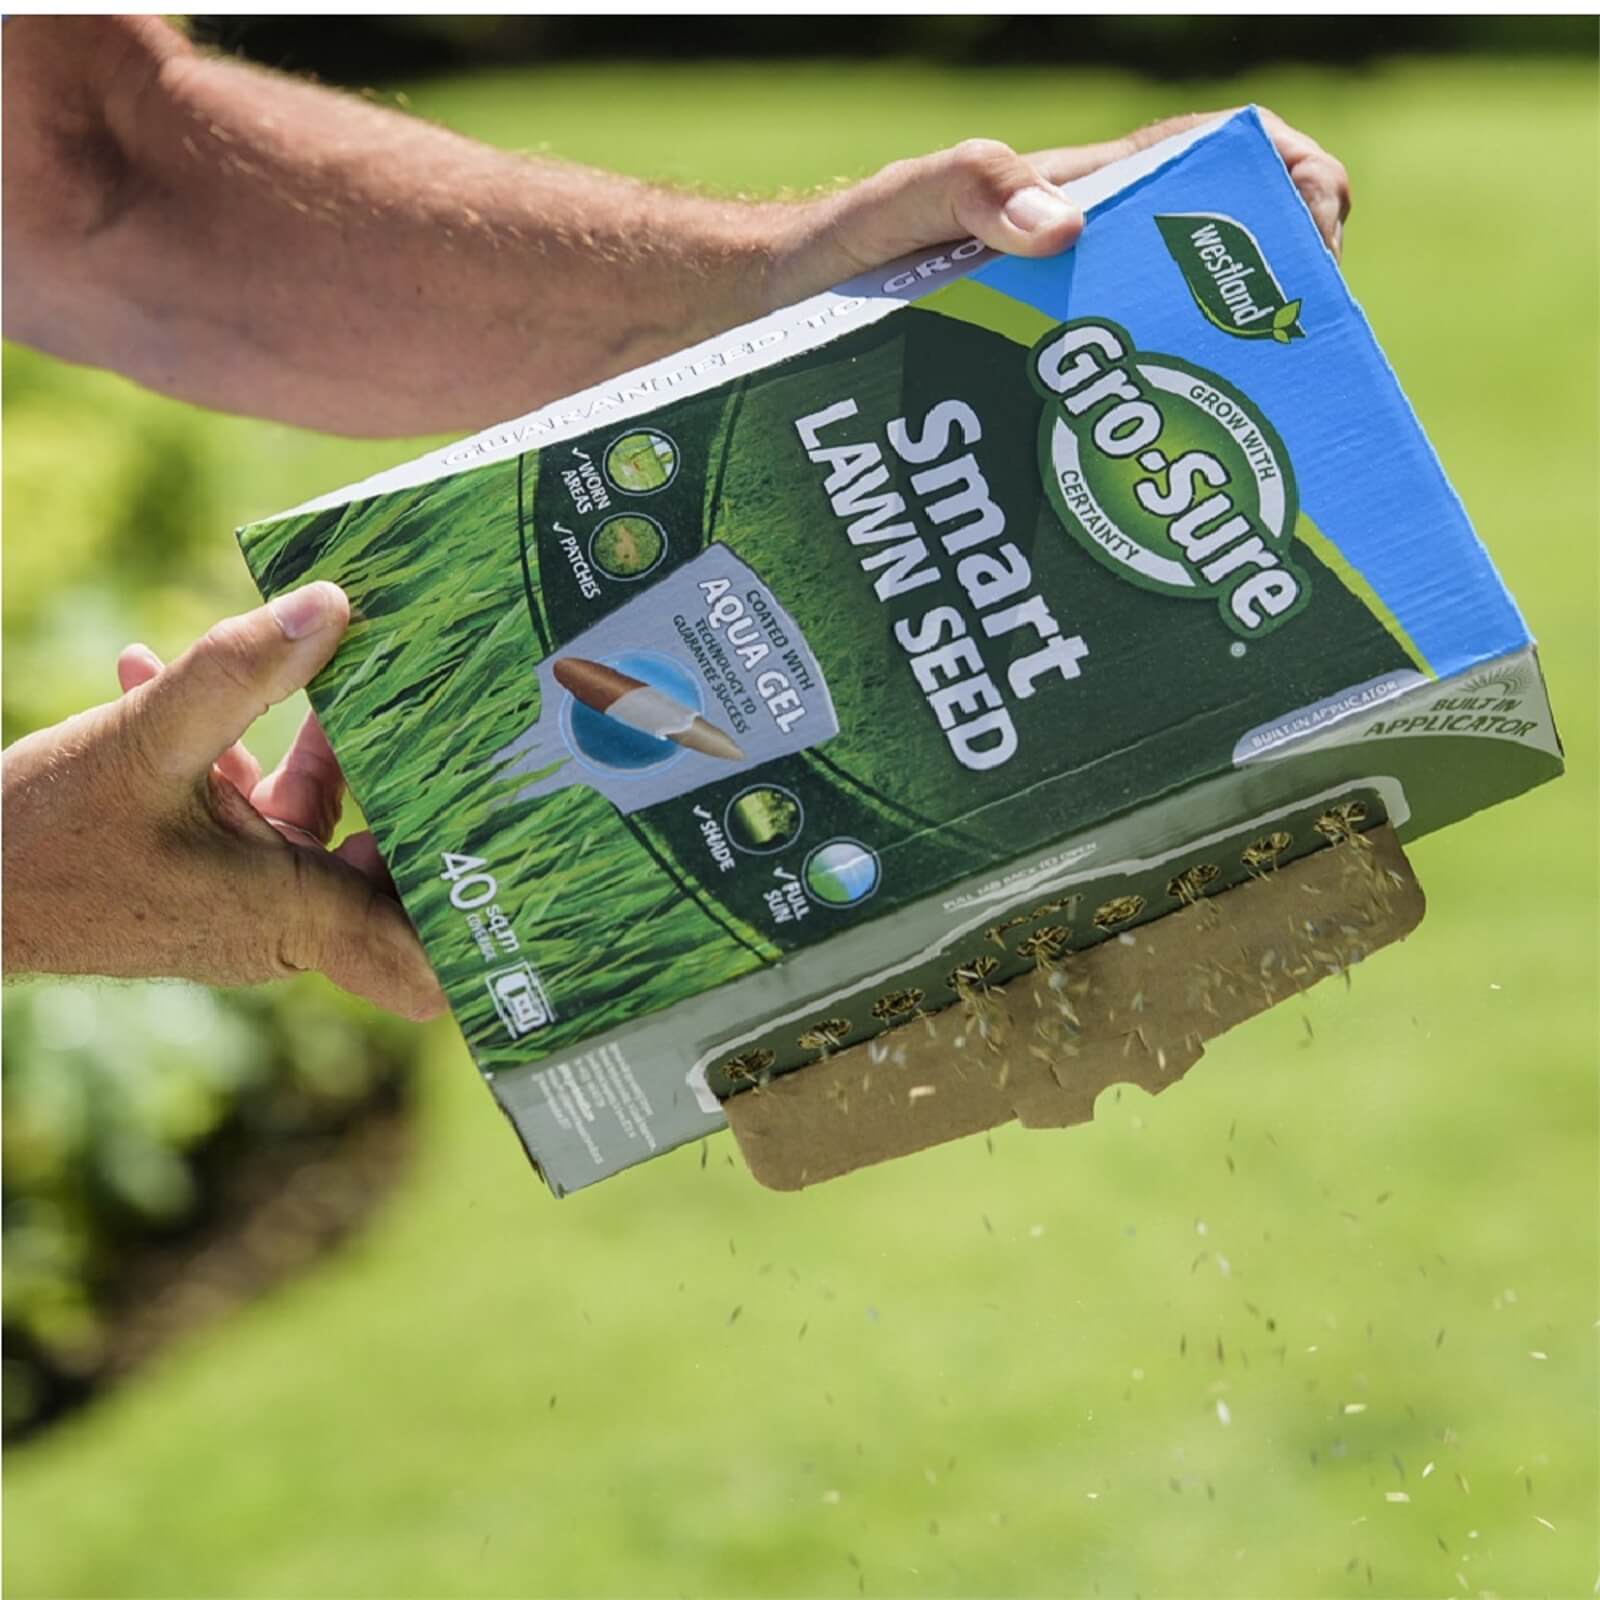 Gro-Sure Smart Lawn Seed - 40m²